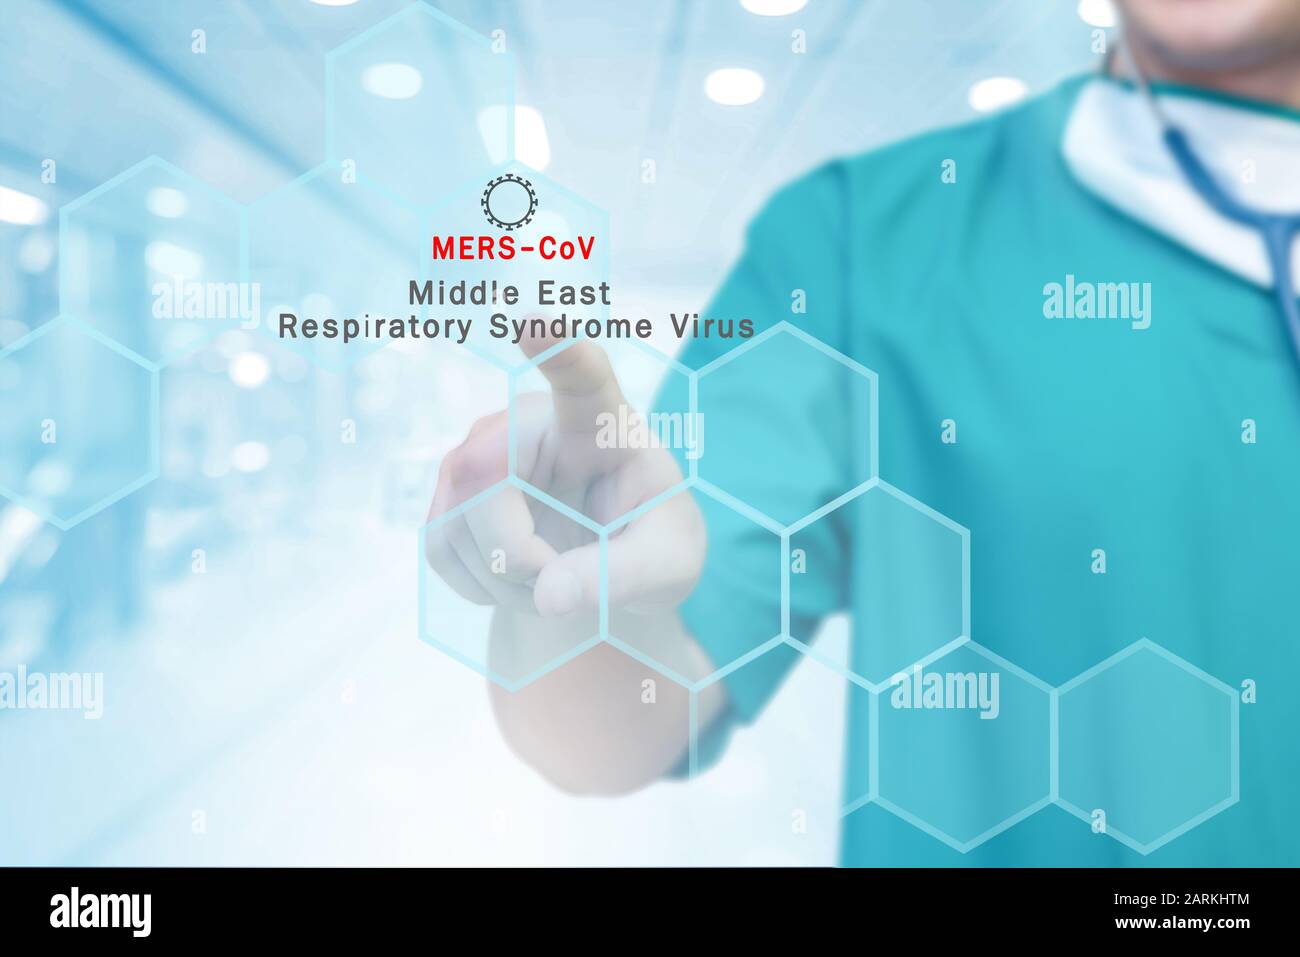 Mers-CoV Coronavirus test in hospital doctor hand touching button on screen analysis. 2019-nCoV virus infection originating in Wuhan, China Stock Photo